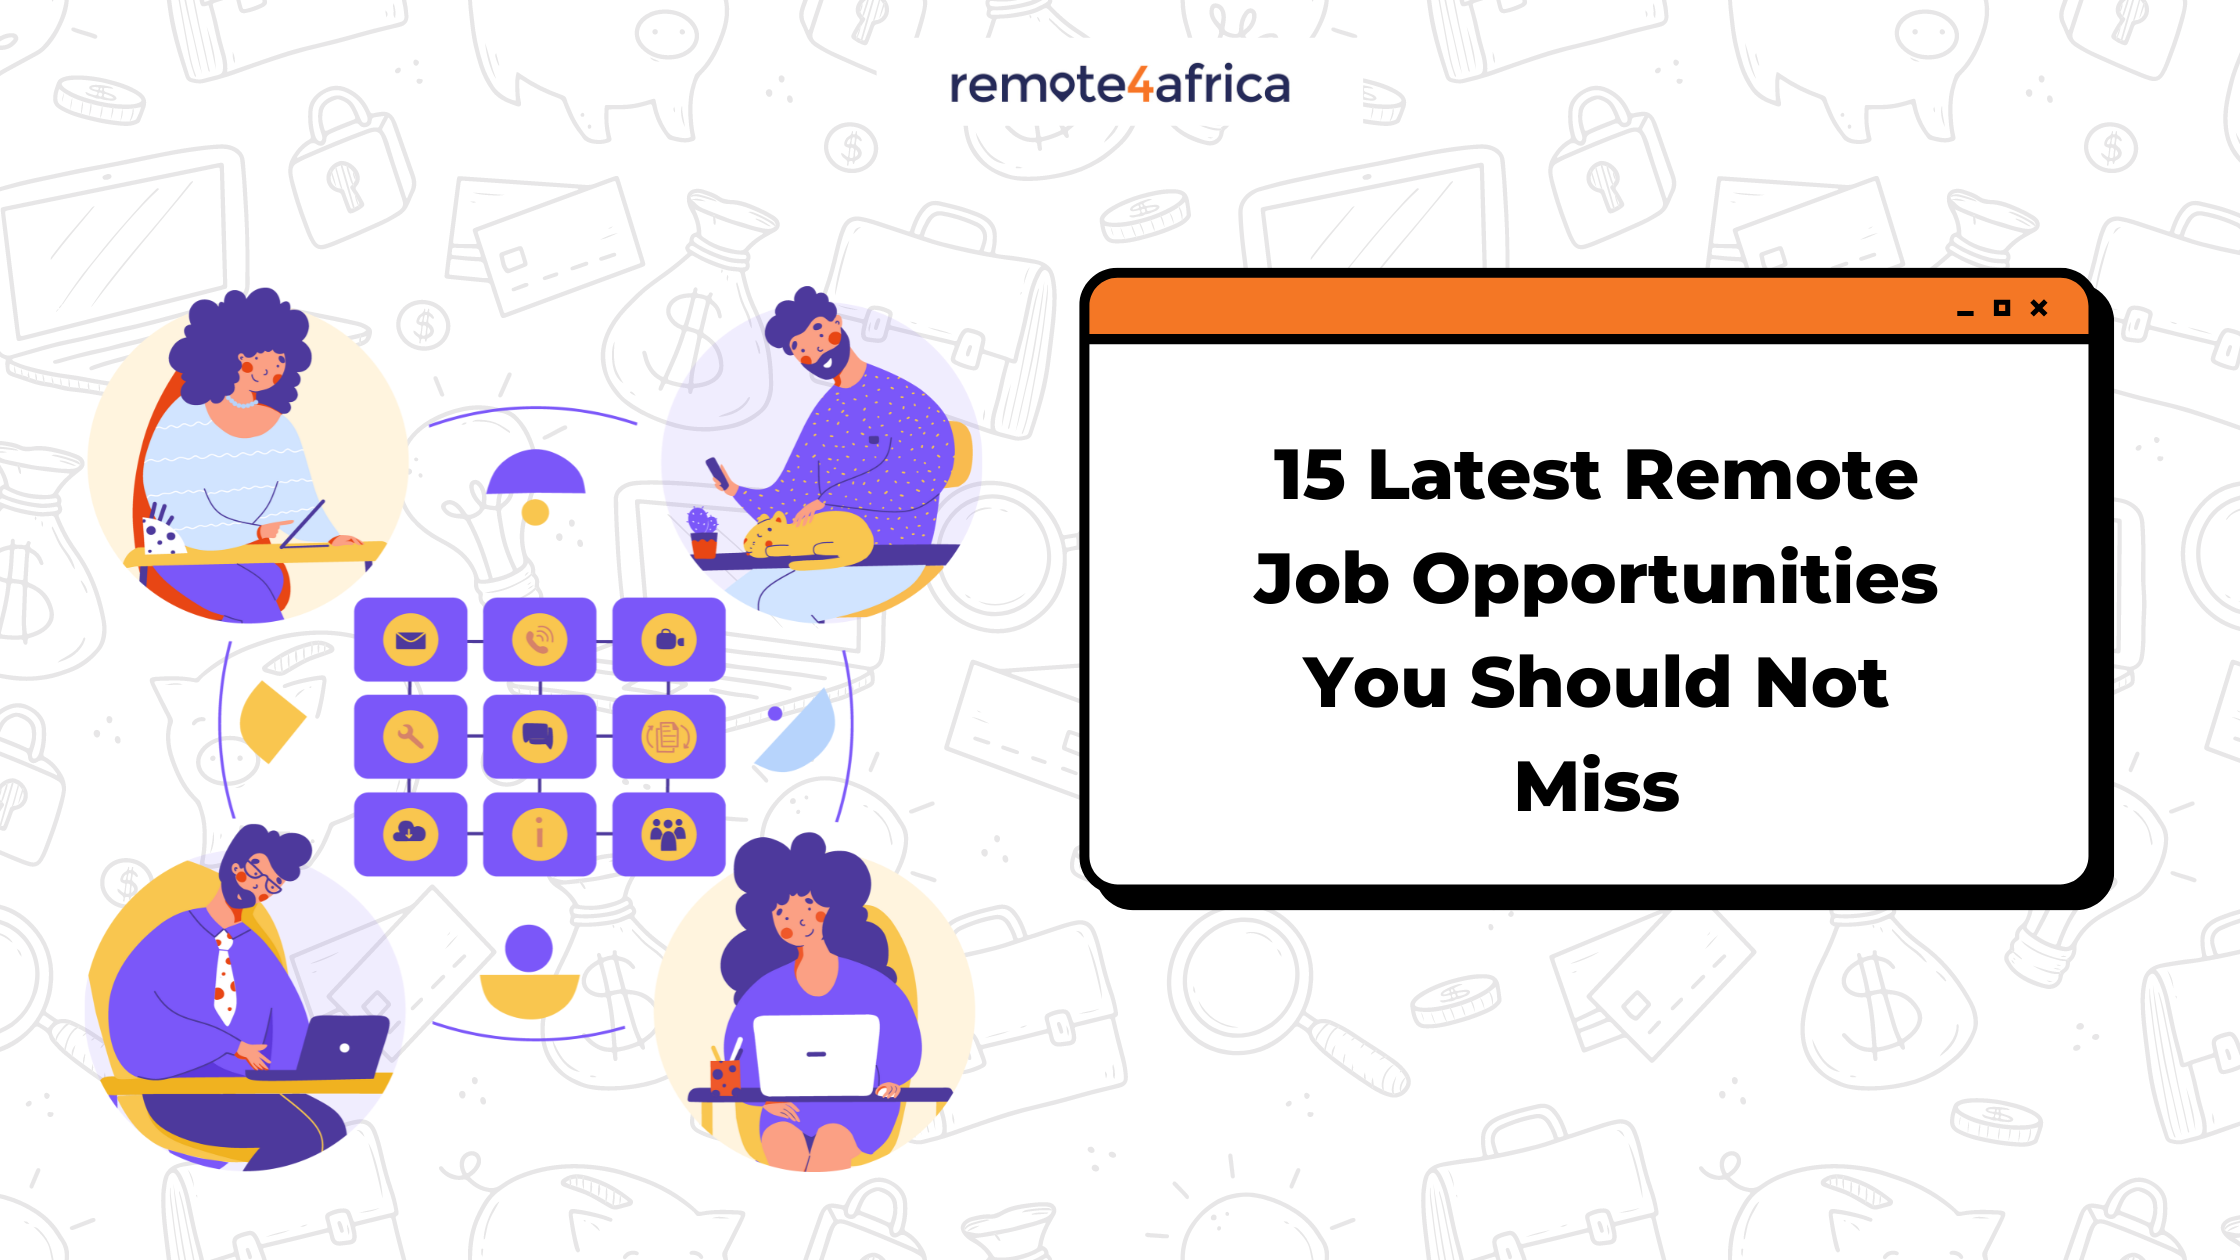 15 Latest Remote Job Opportunities You Should Not Miss